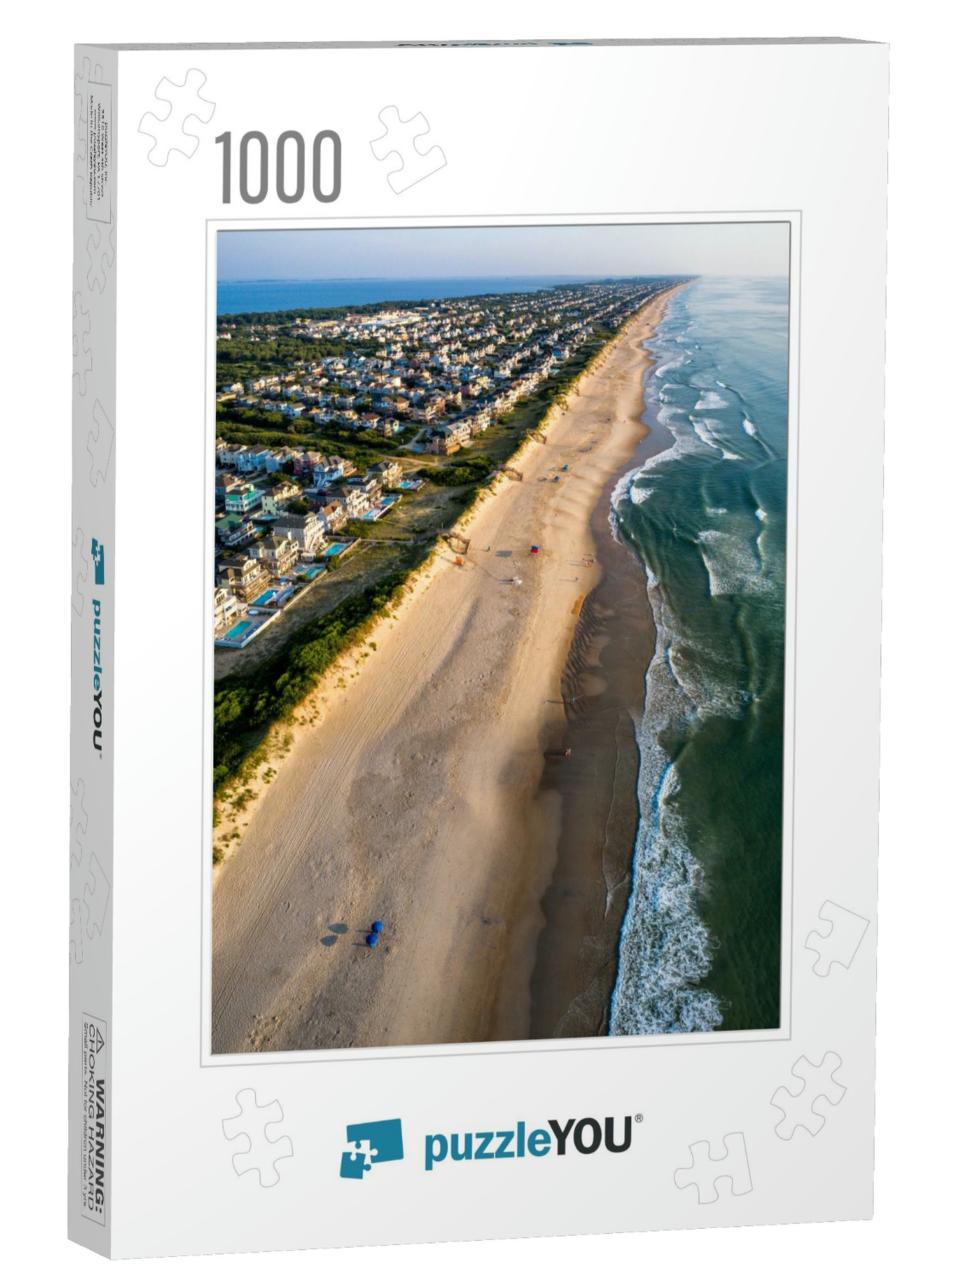 Aerial View of Corolla North Carolina Beaches... Jigsaw Puzzle with 1000 pieces